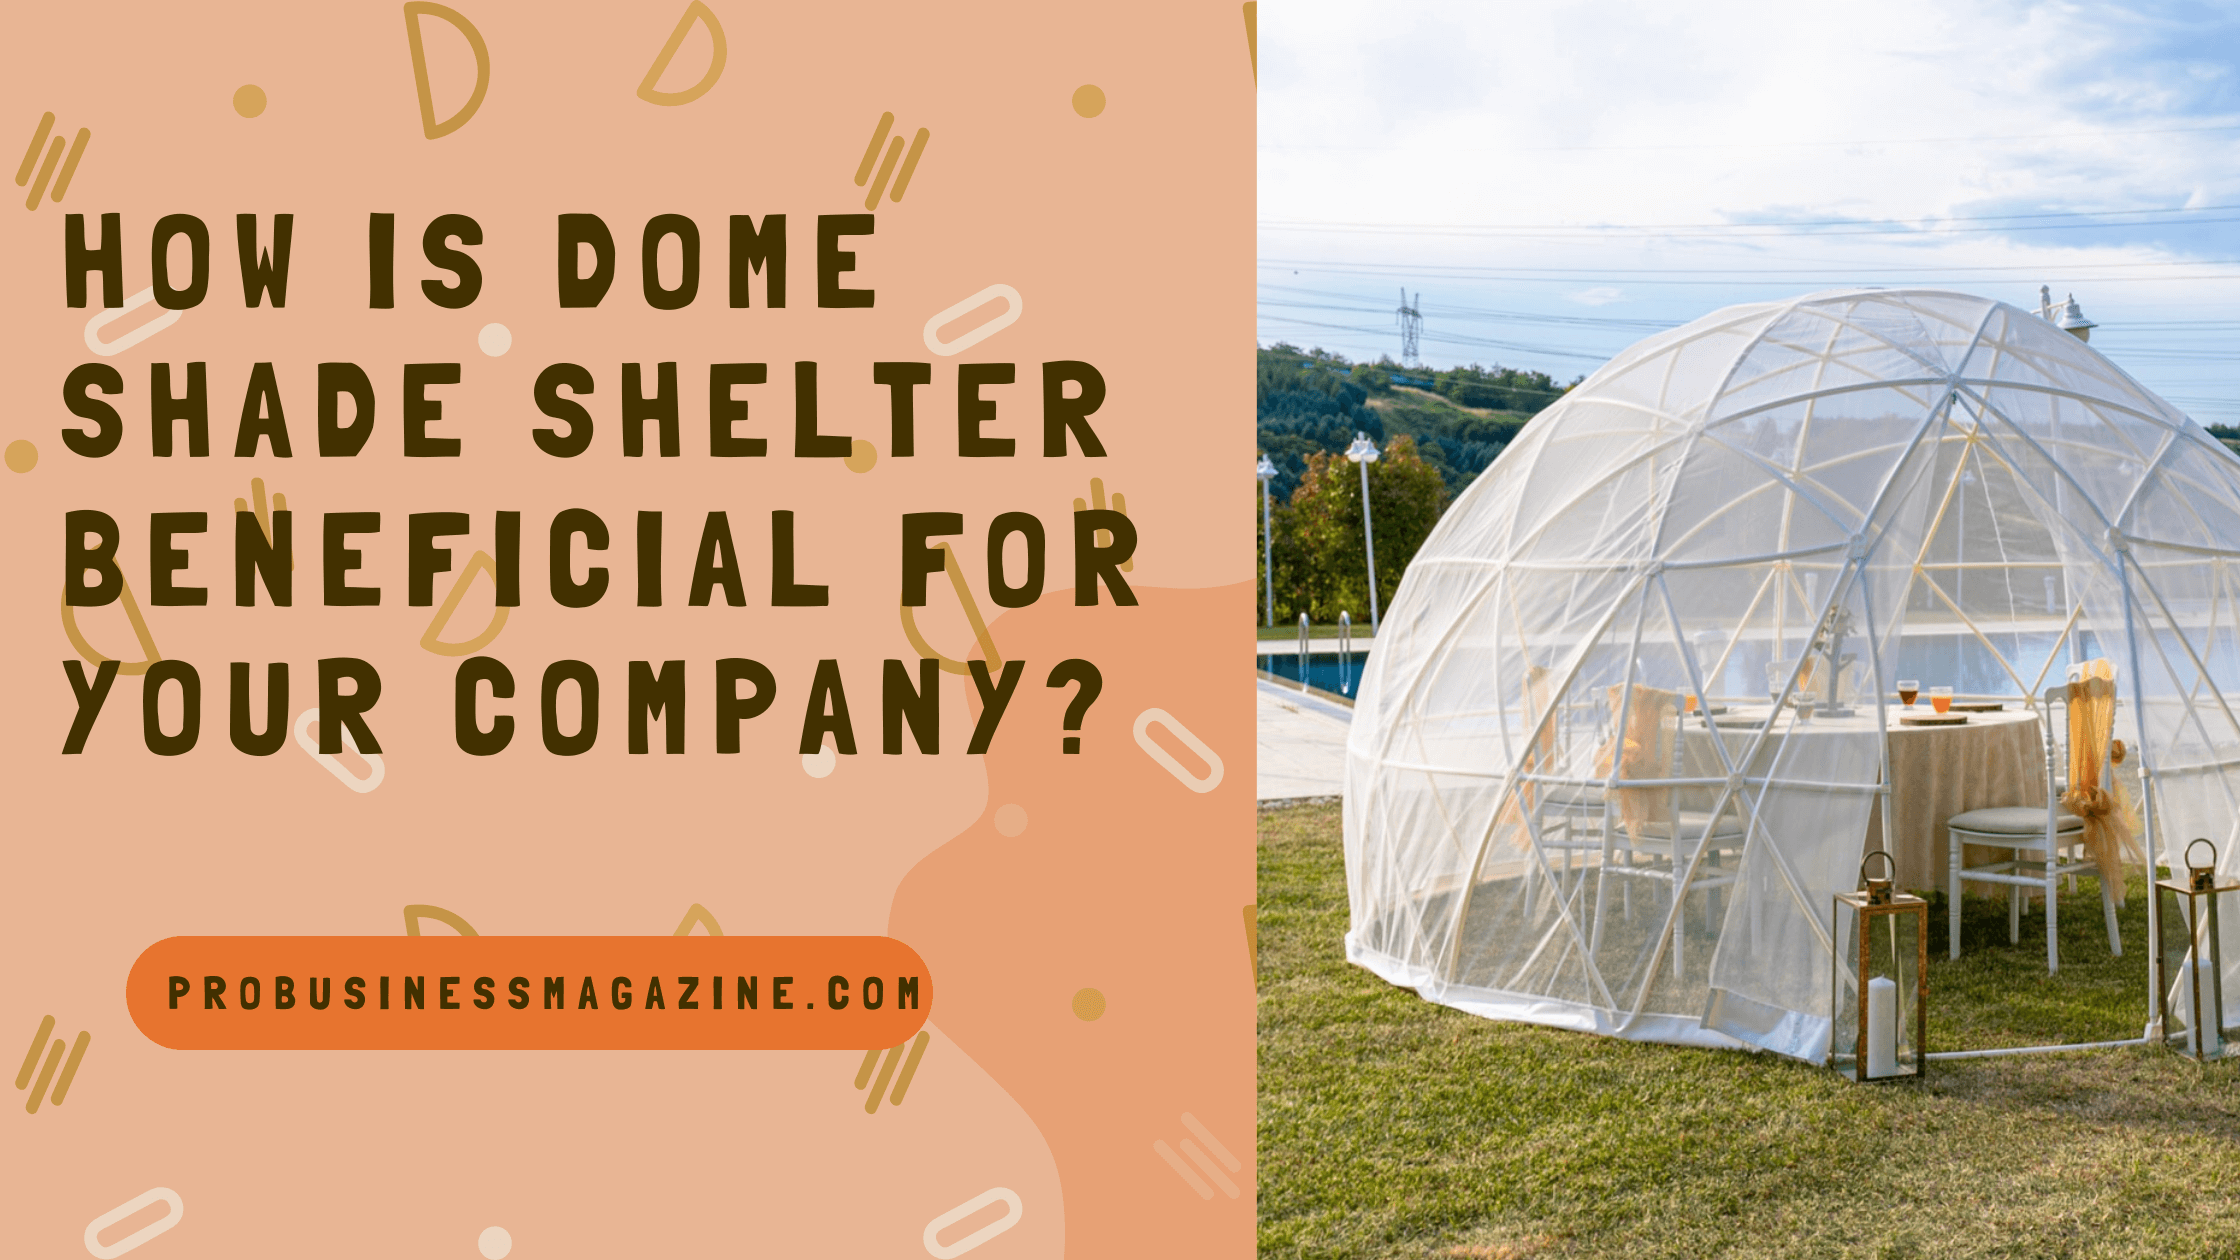 How is Dome Shade Shelter Beneficial for Your Company?